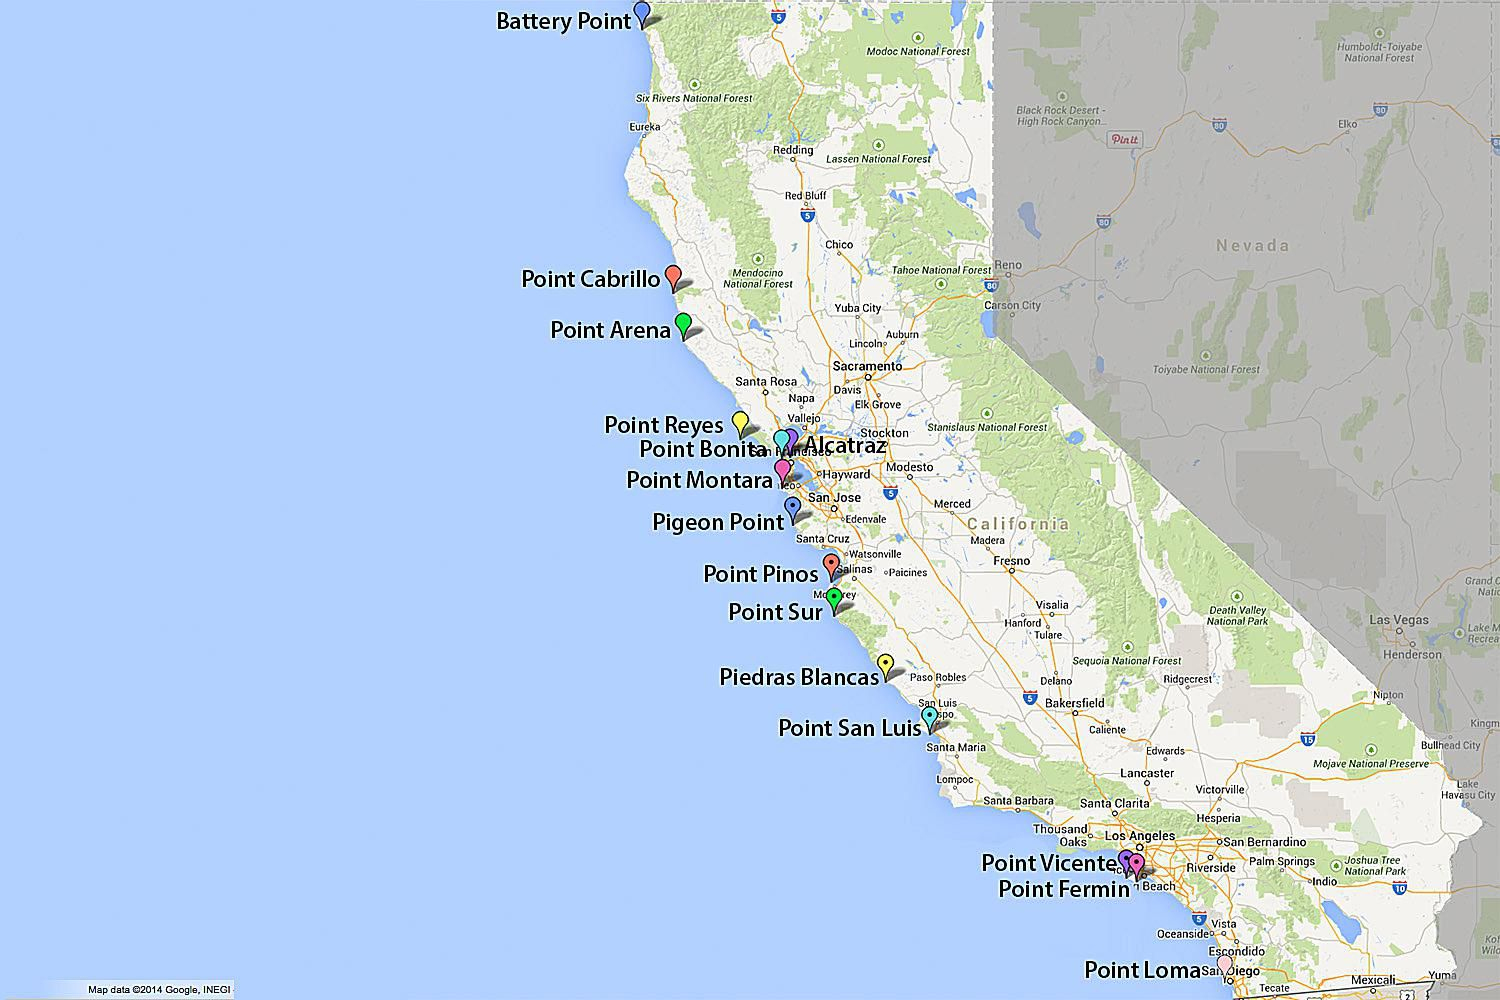 Maps Of California - Created For Visitors And Travelers - Www California Map